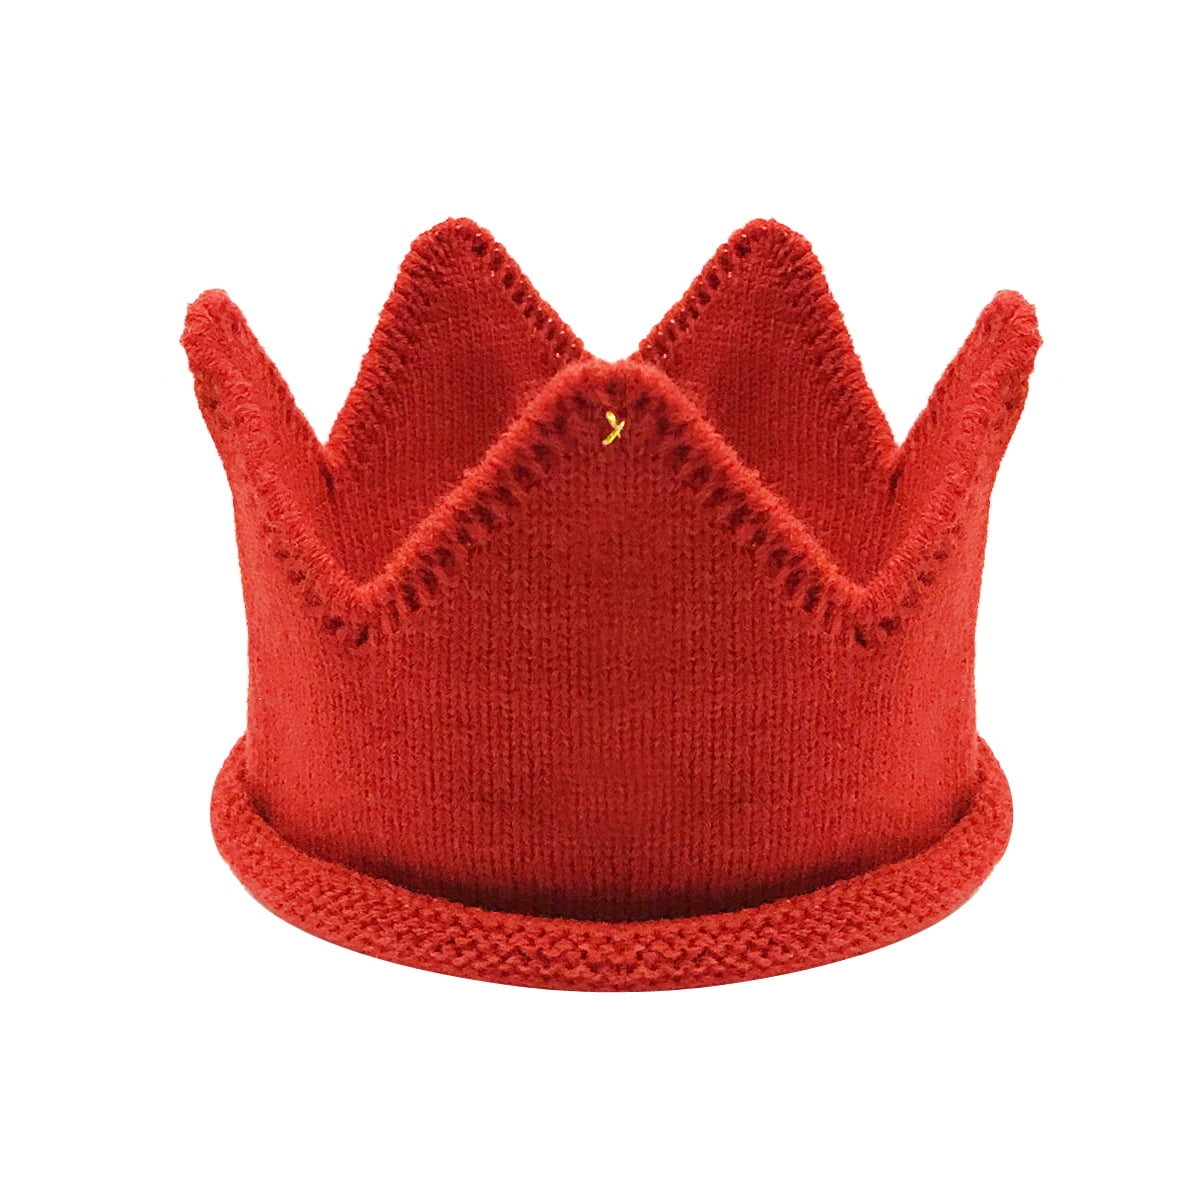 New Fashion Cute Baby Boys Girls Bright Color Crown Knit Headband Hat Great Gift 